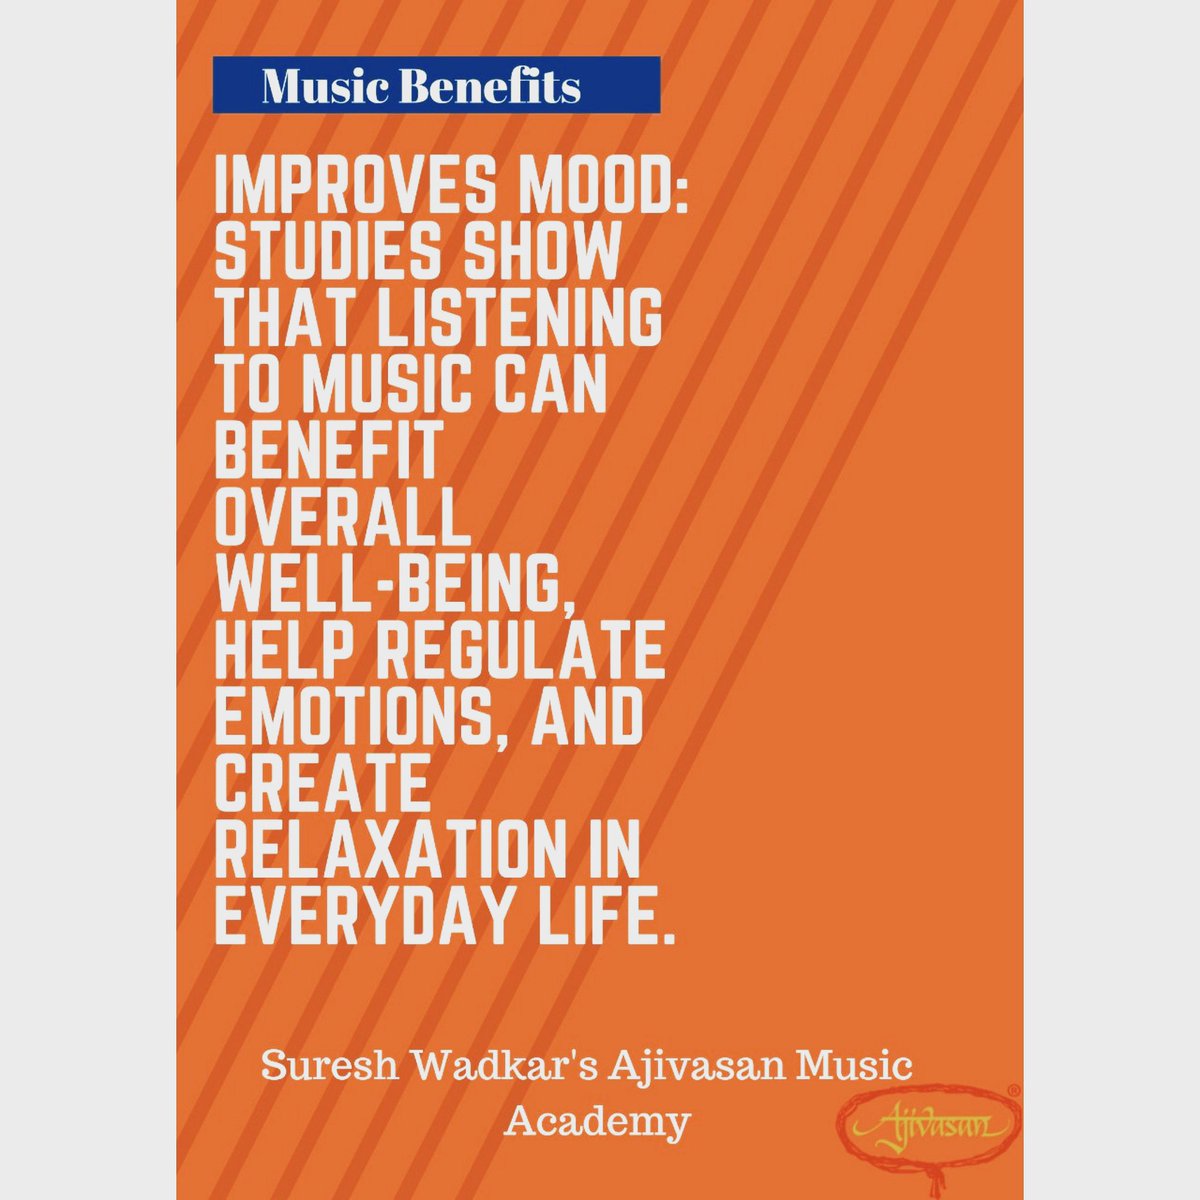 Isn’t it interesting how hearing a particular song can bring back a special memory or make you feel happy or calm or pumped up?

#ajivasan #musicbenefits#mondaybenefits #ajivasanmusicacademy#ajivasanmusic#onlinemusic#musiclovers#onlinemusiclessons #blessedlife #ajivasanevents